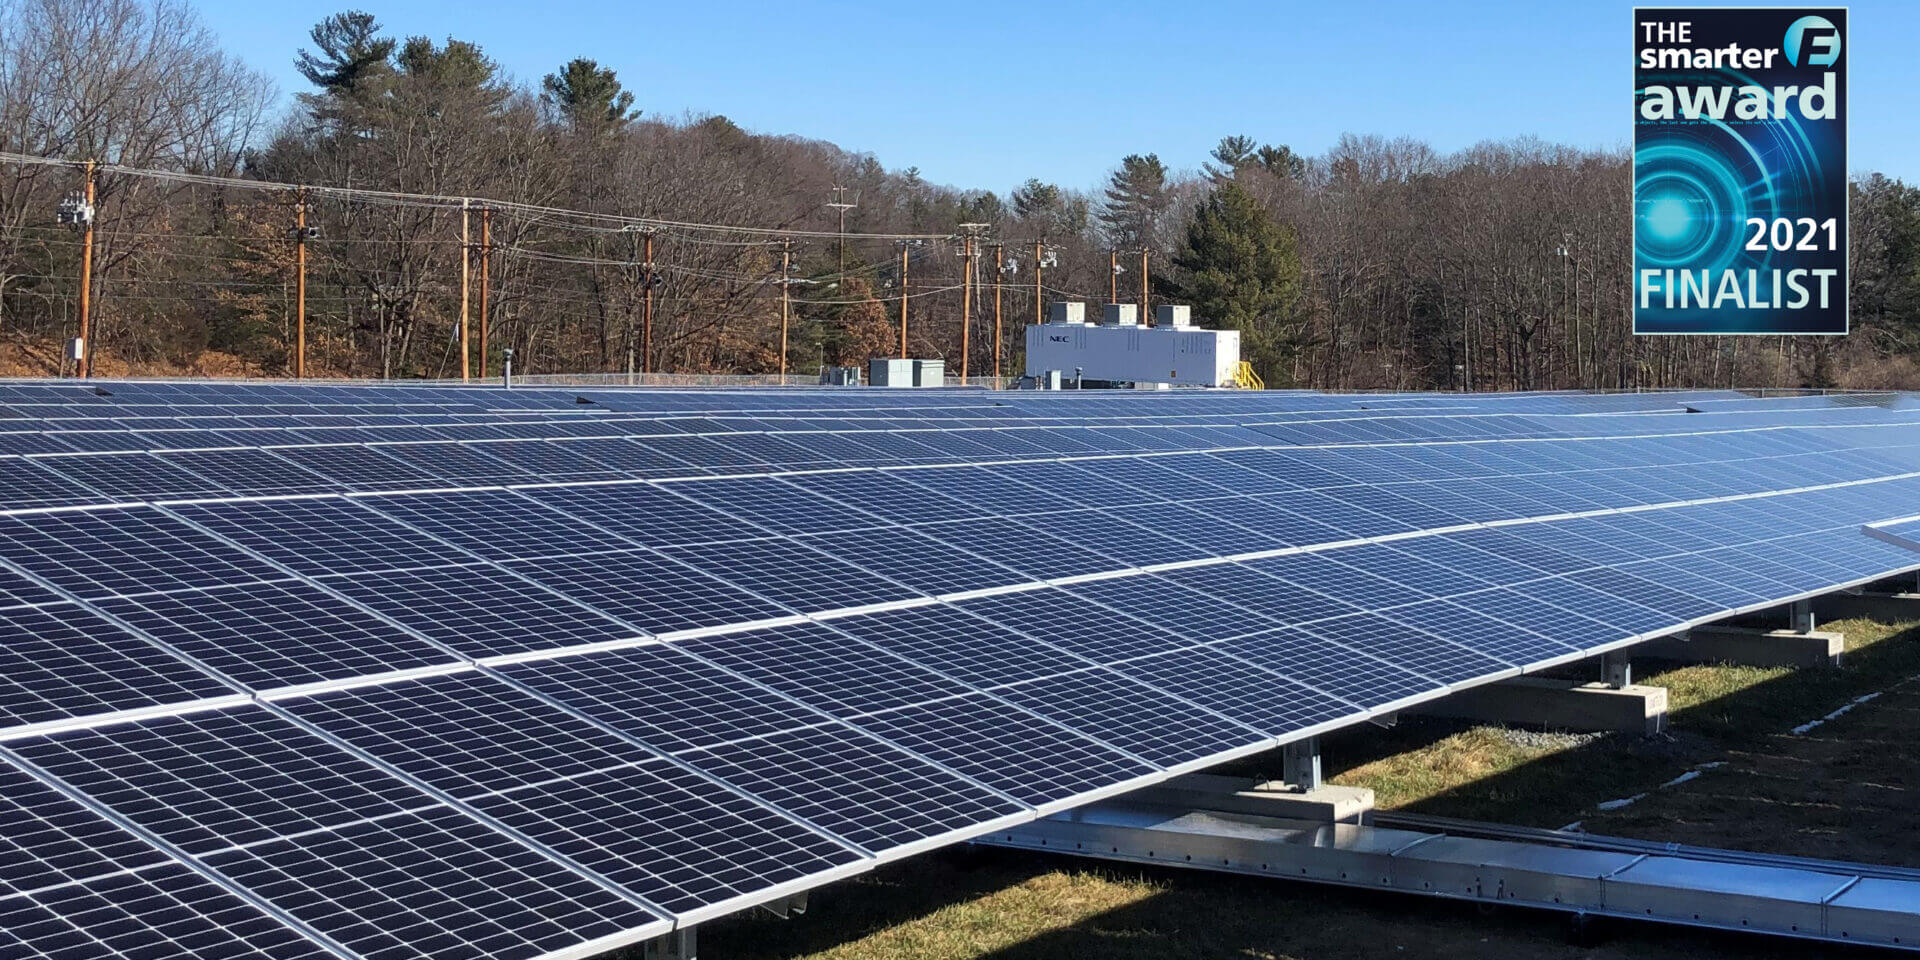 CS Energy is expanding with more solar power and energy storage in the southeast